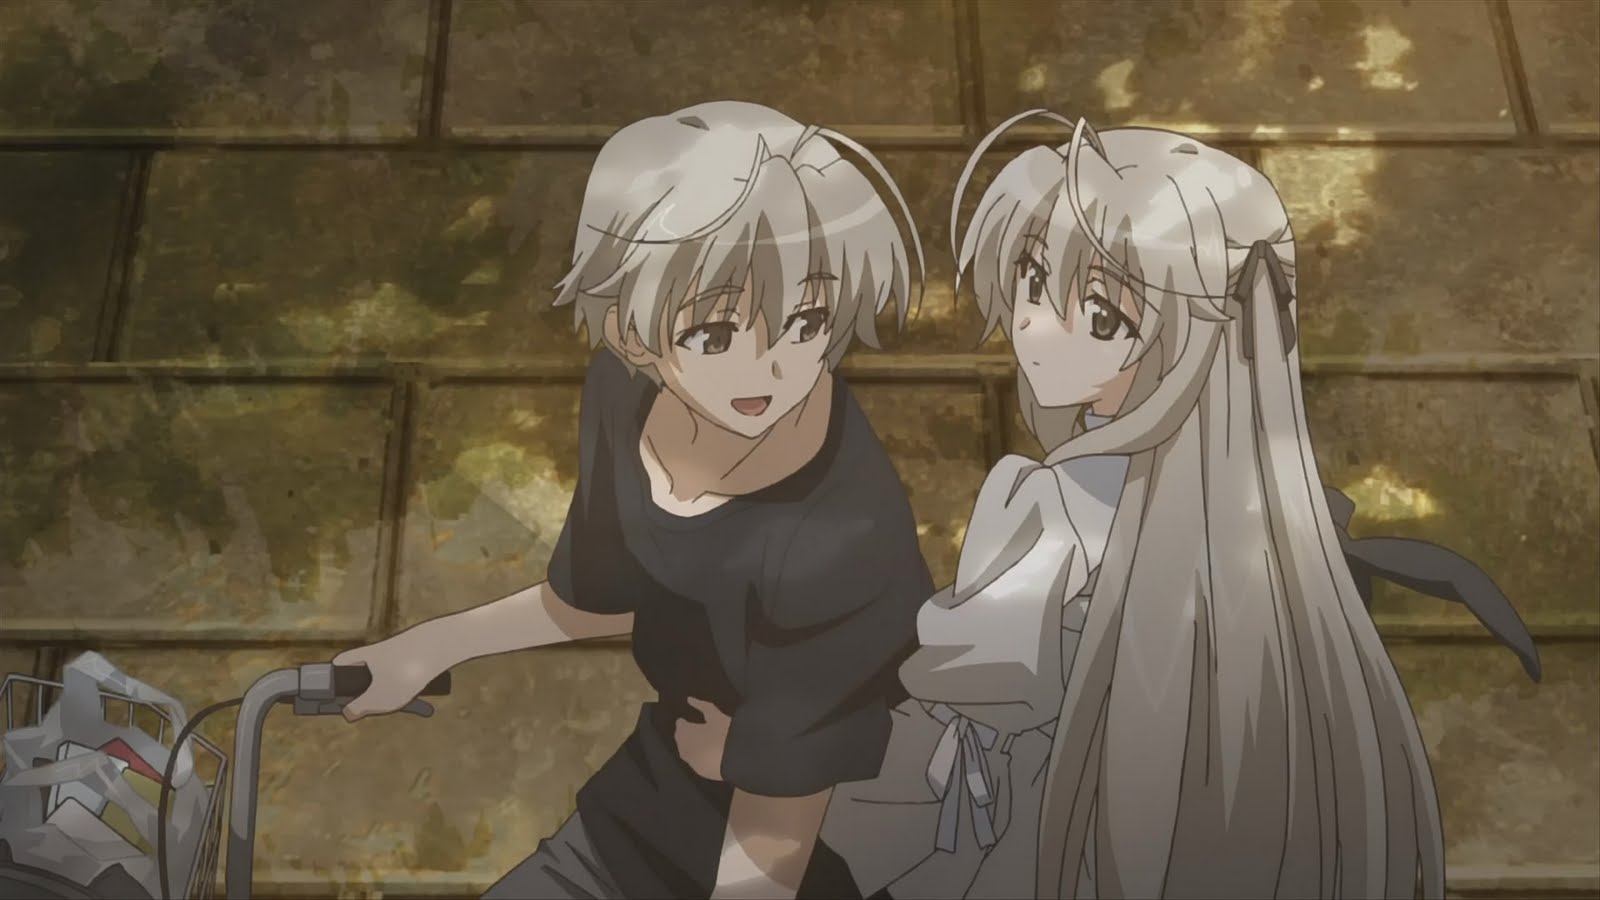 Krisz On Anime Manga Cosplay And Video Games Anime That Will Stay In Japan Yosuga No Sora